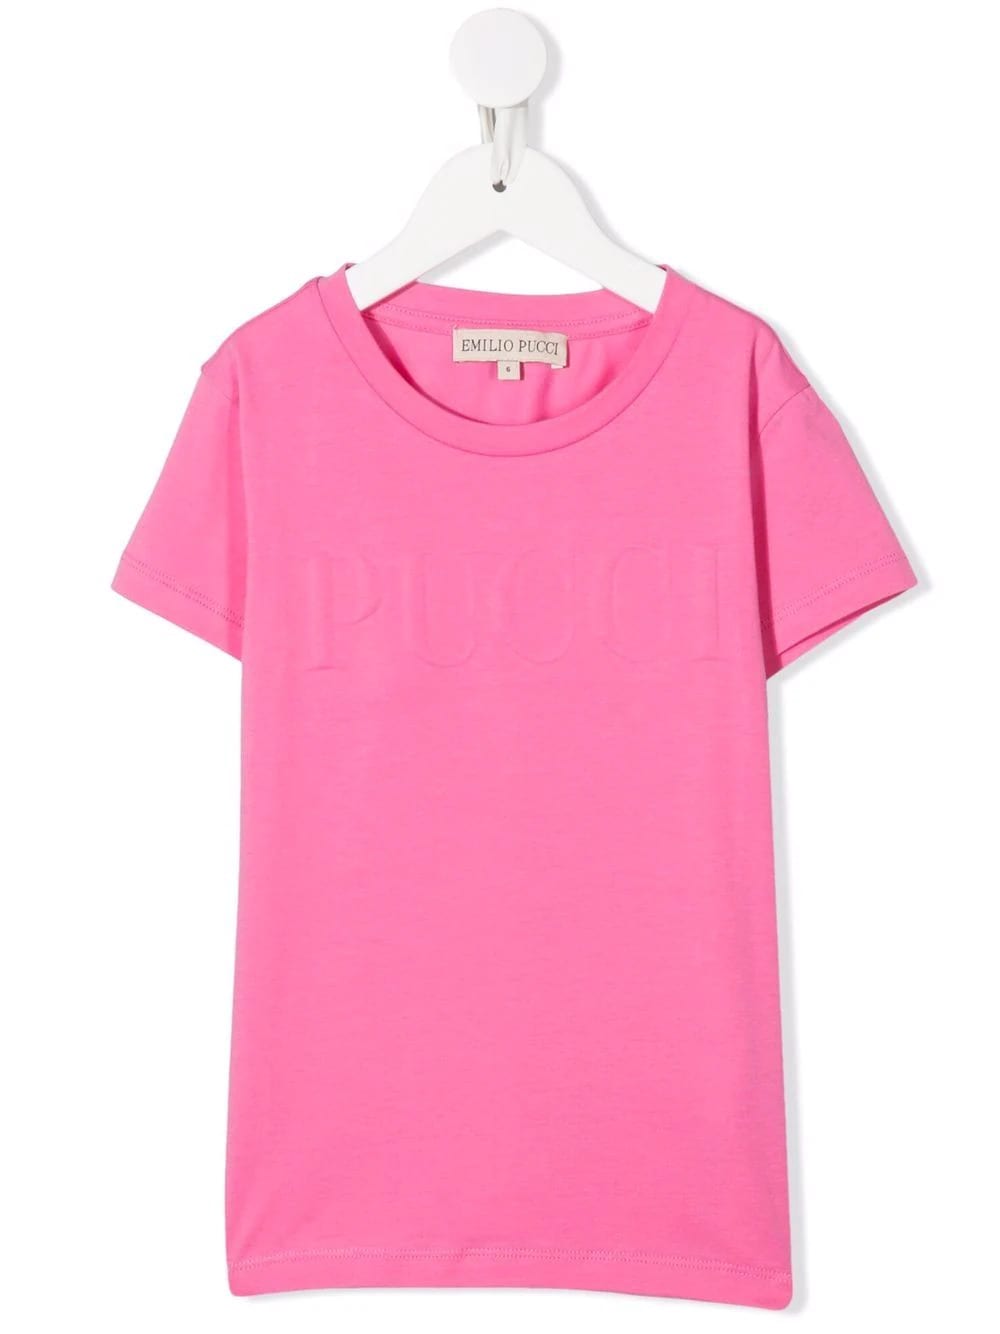 Emilio Pucci Kids Bright Pink T-shirt With Embossed Logo